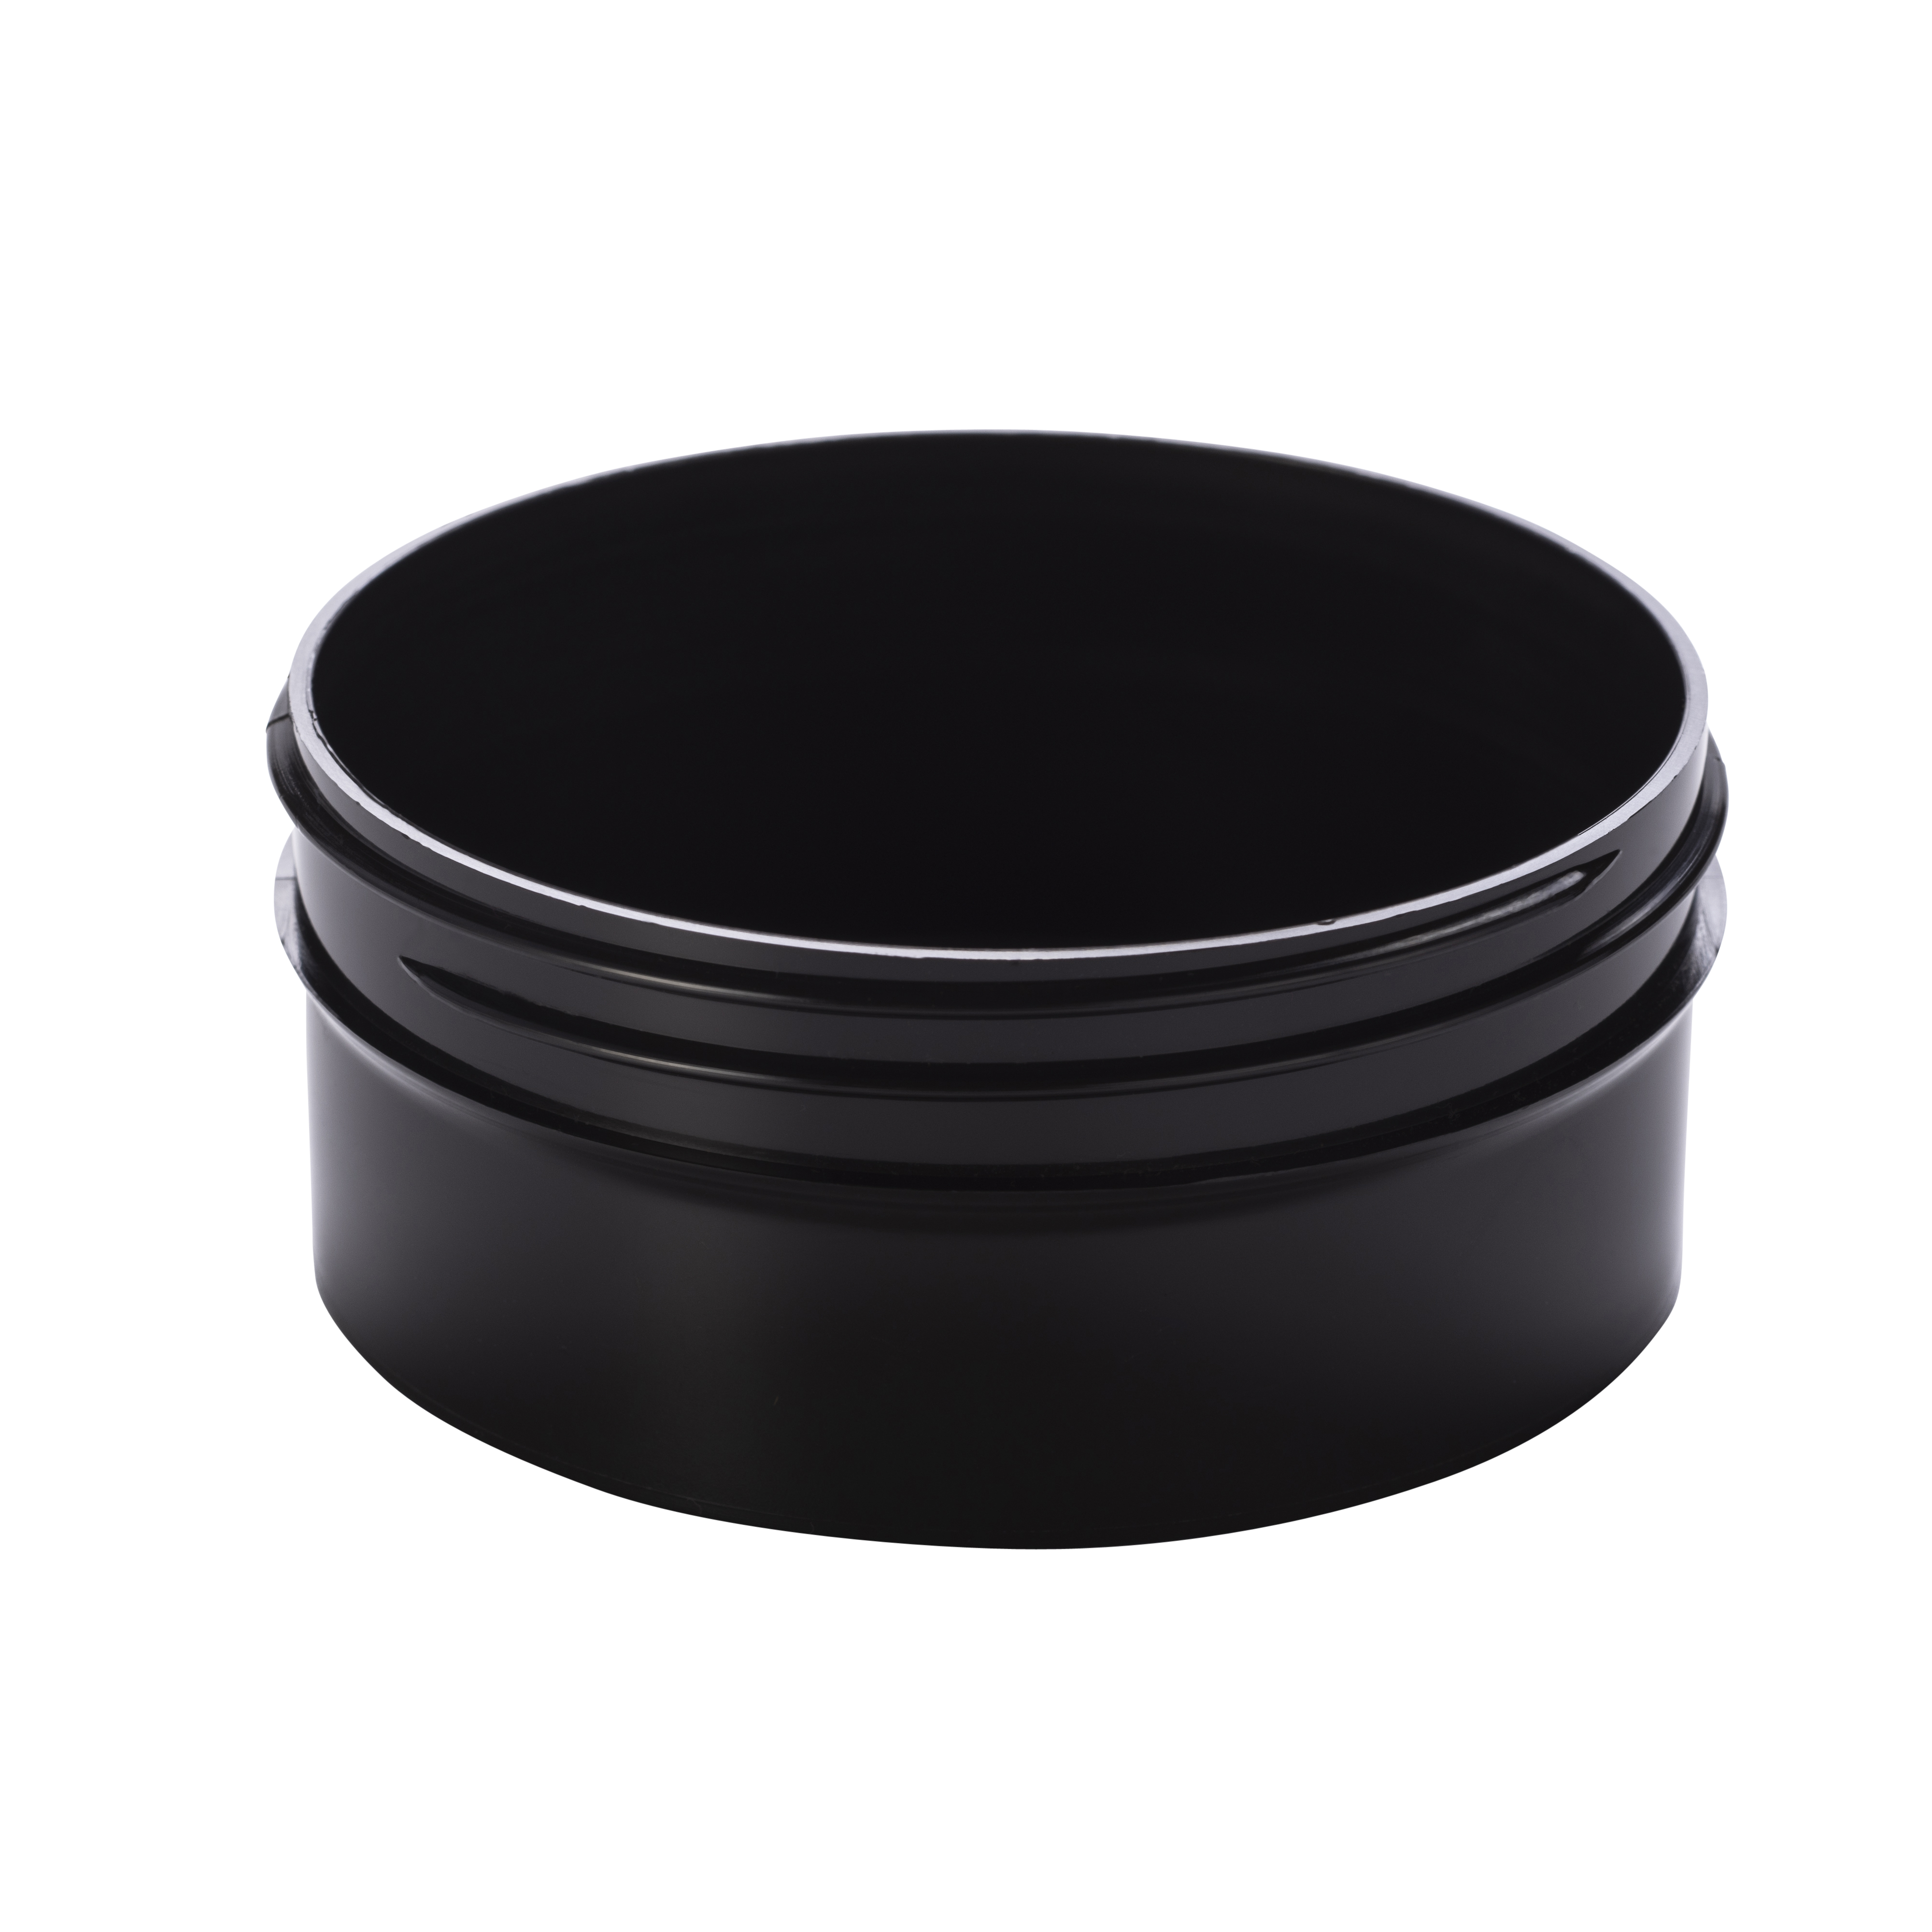 Wide black container